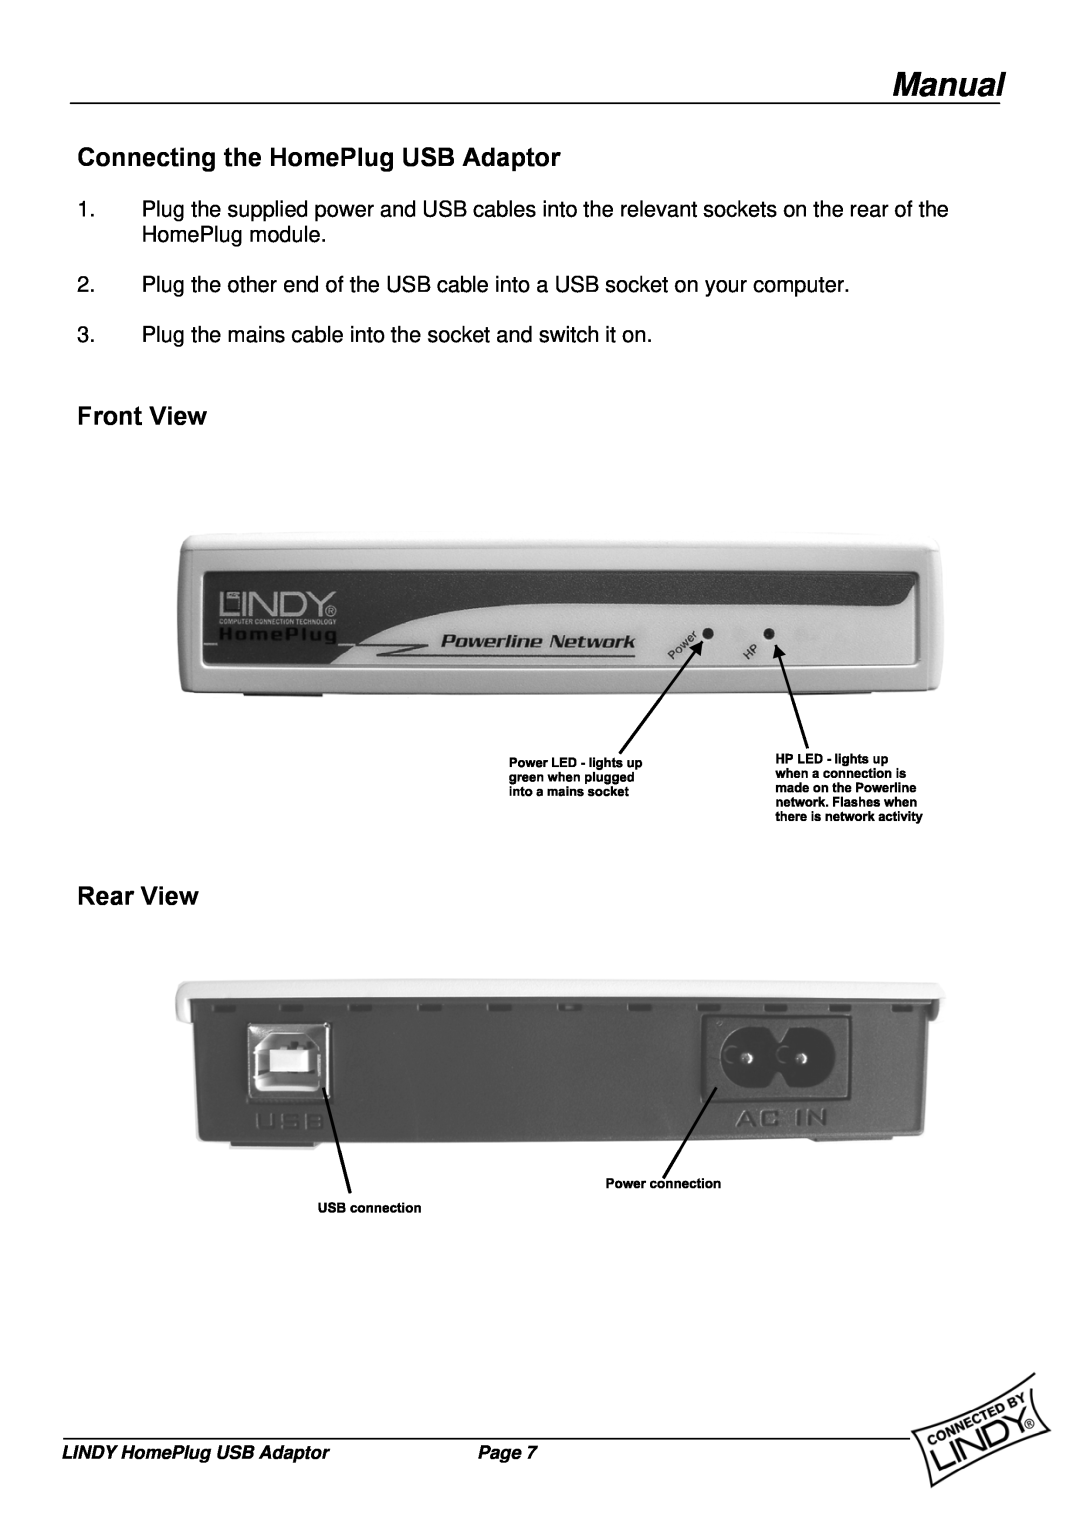 Lindy 25121 user manual Connecting the HomePlug USB Adaptor, Front View Rear View, Manual 